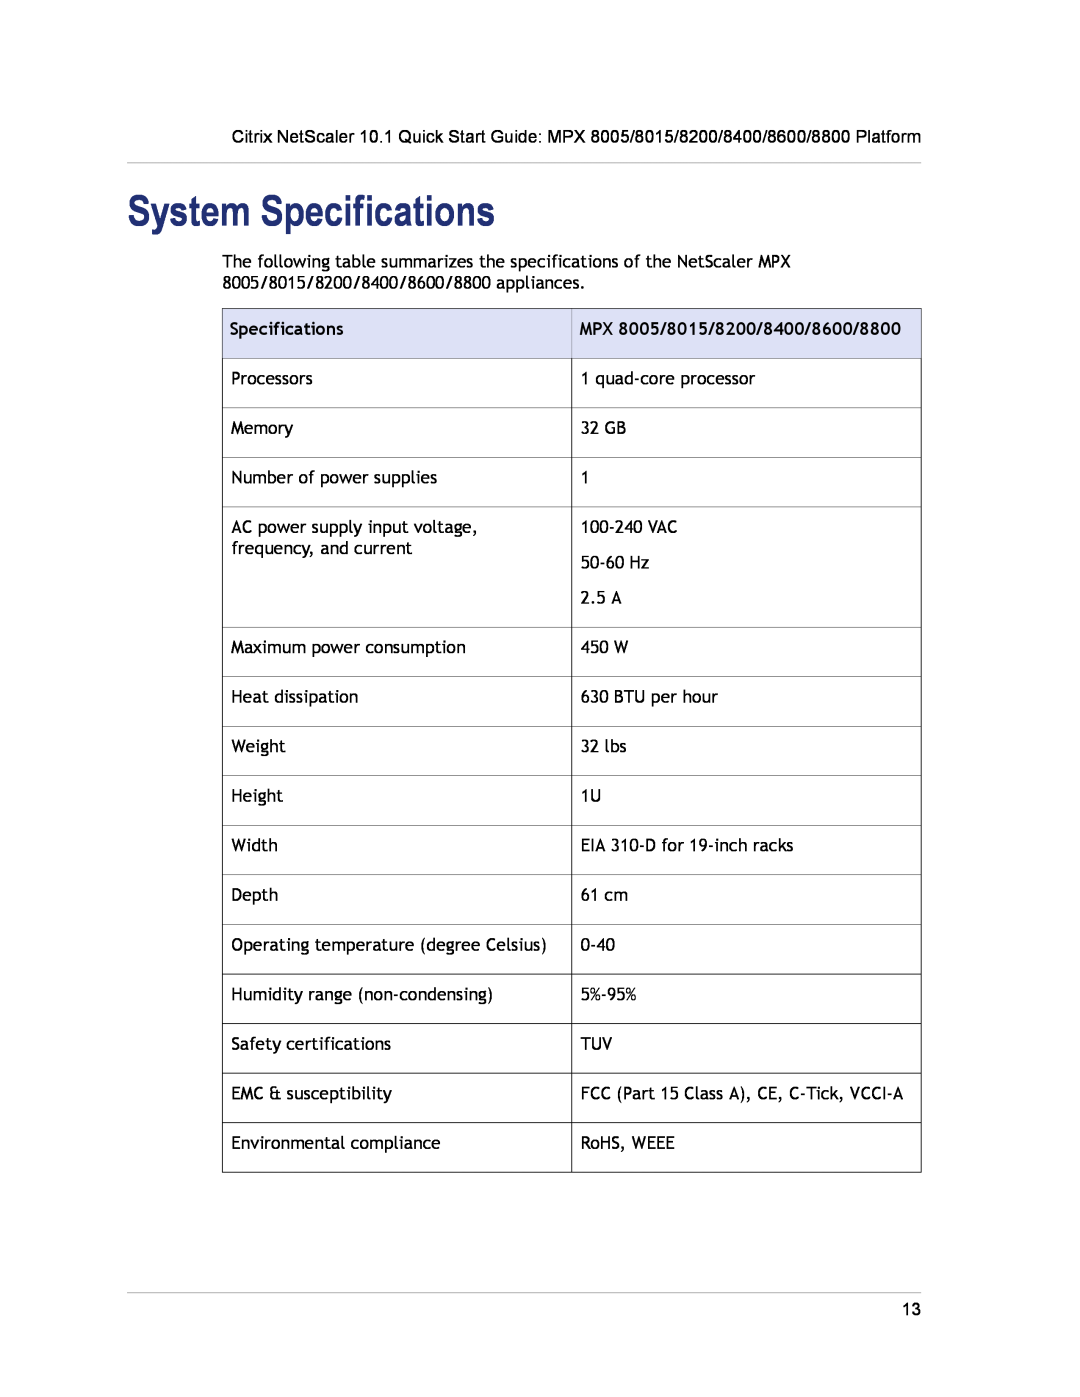 Citrix Systems quick start System Specifications, MPX 8005/8015/8200/8400/8600/8800 